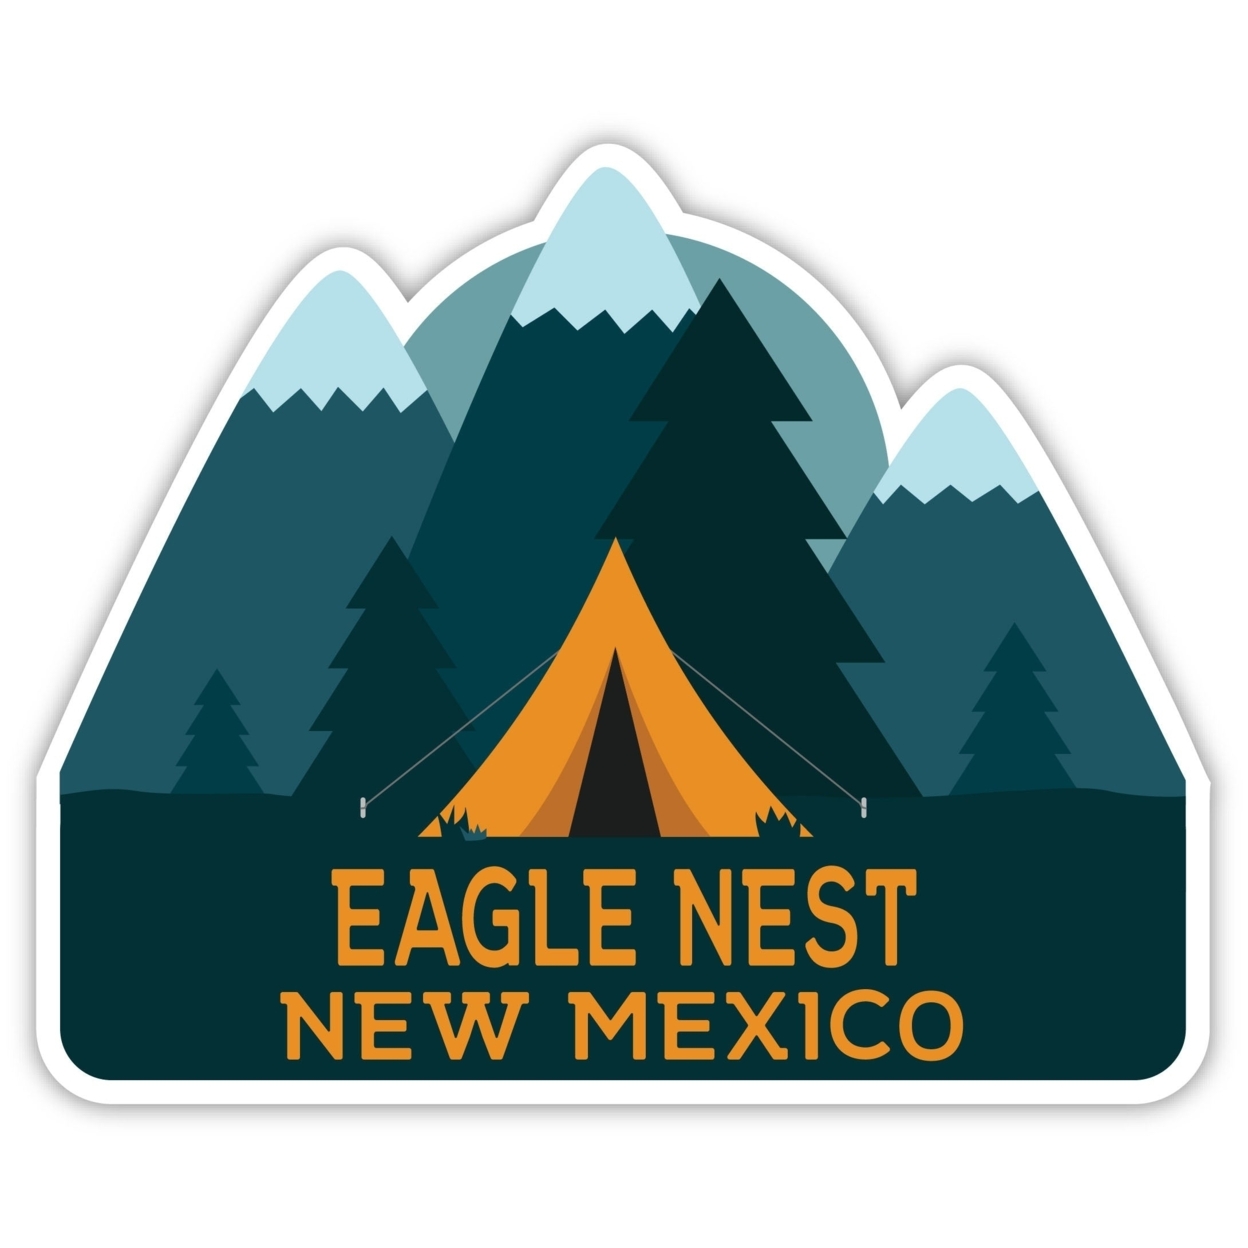 Eagle Nest New Mexico Souvenir Decorative Stickers (Choose Theme And Size) - 4-Pack, 12-Inch, Tent